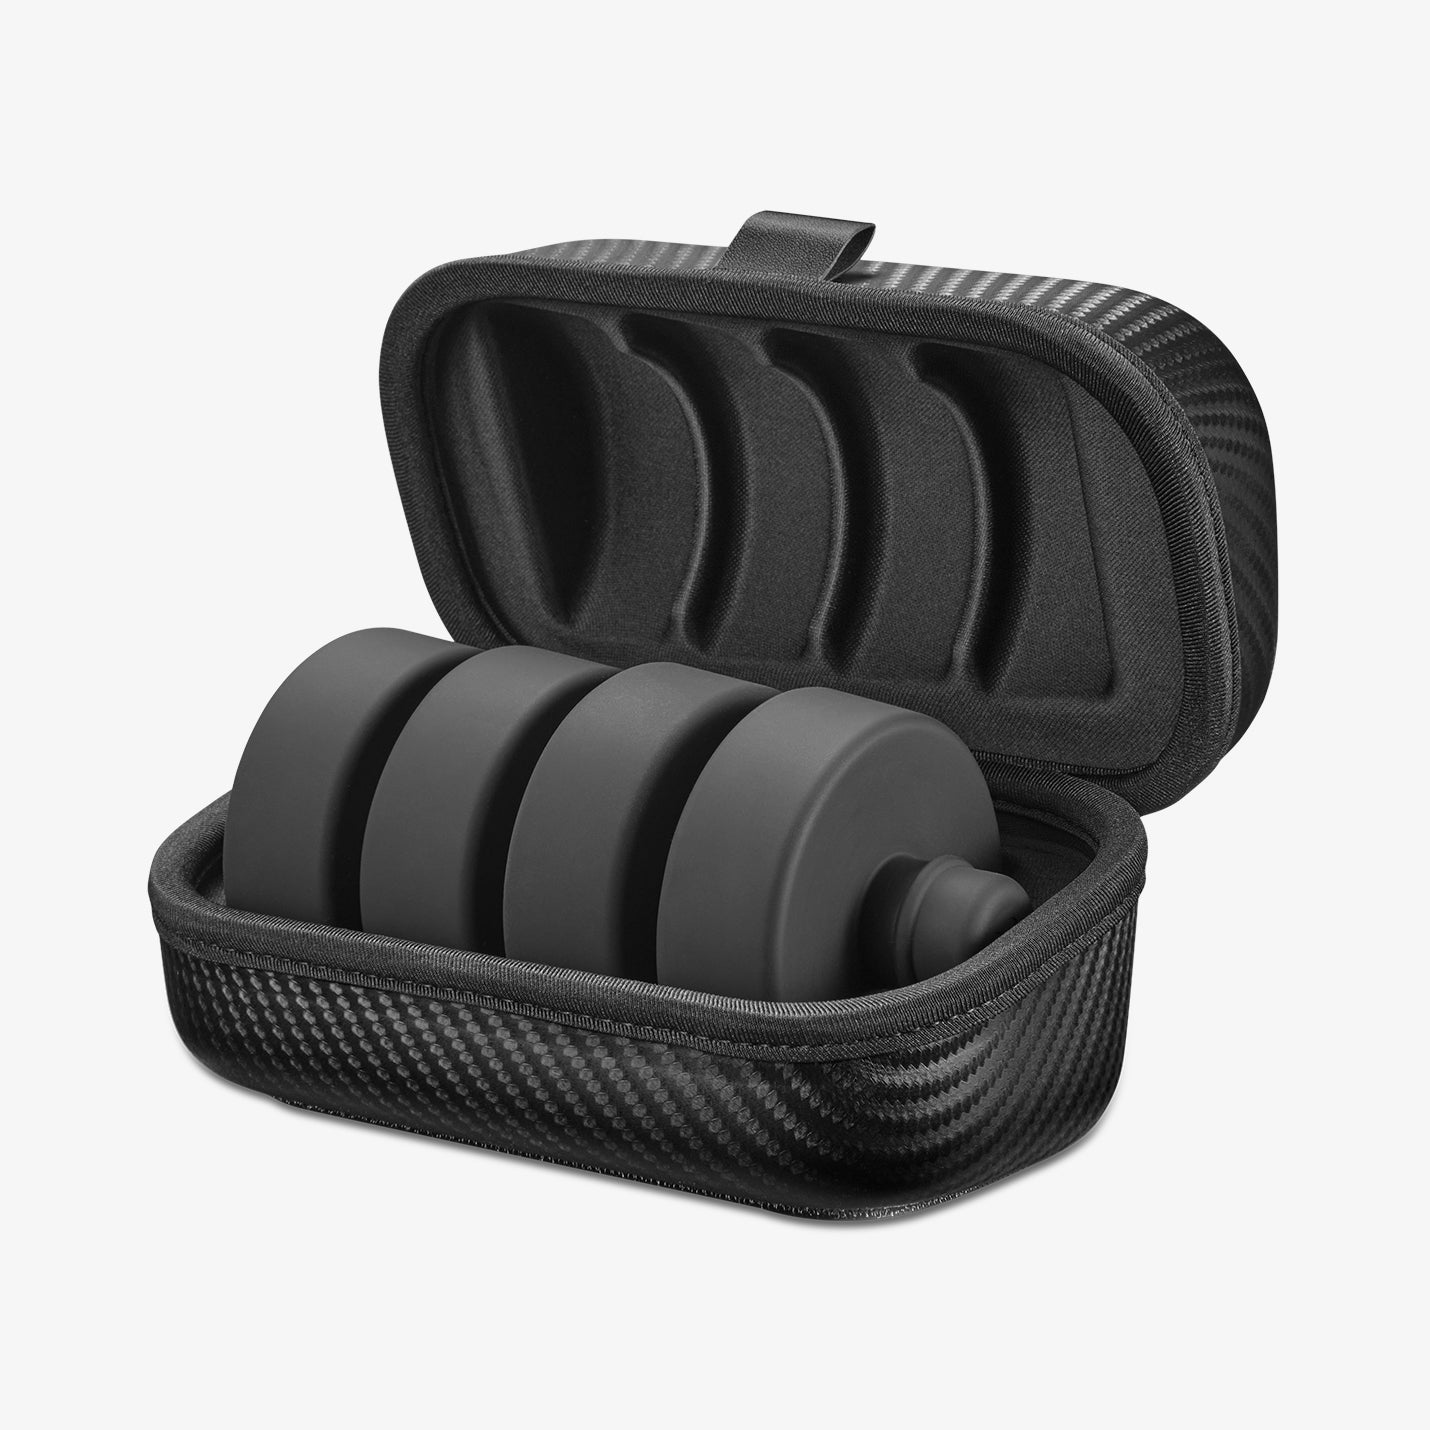 ACP07174 - Tesla Lifting Jack Pads TO310 in Black showing the open case with pads inside